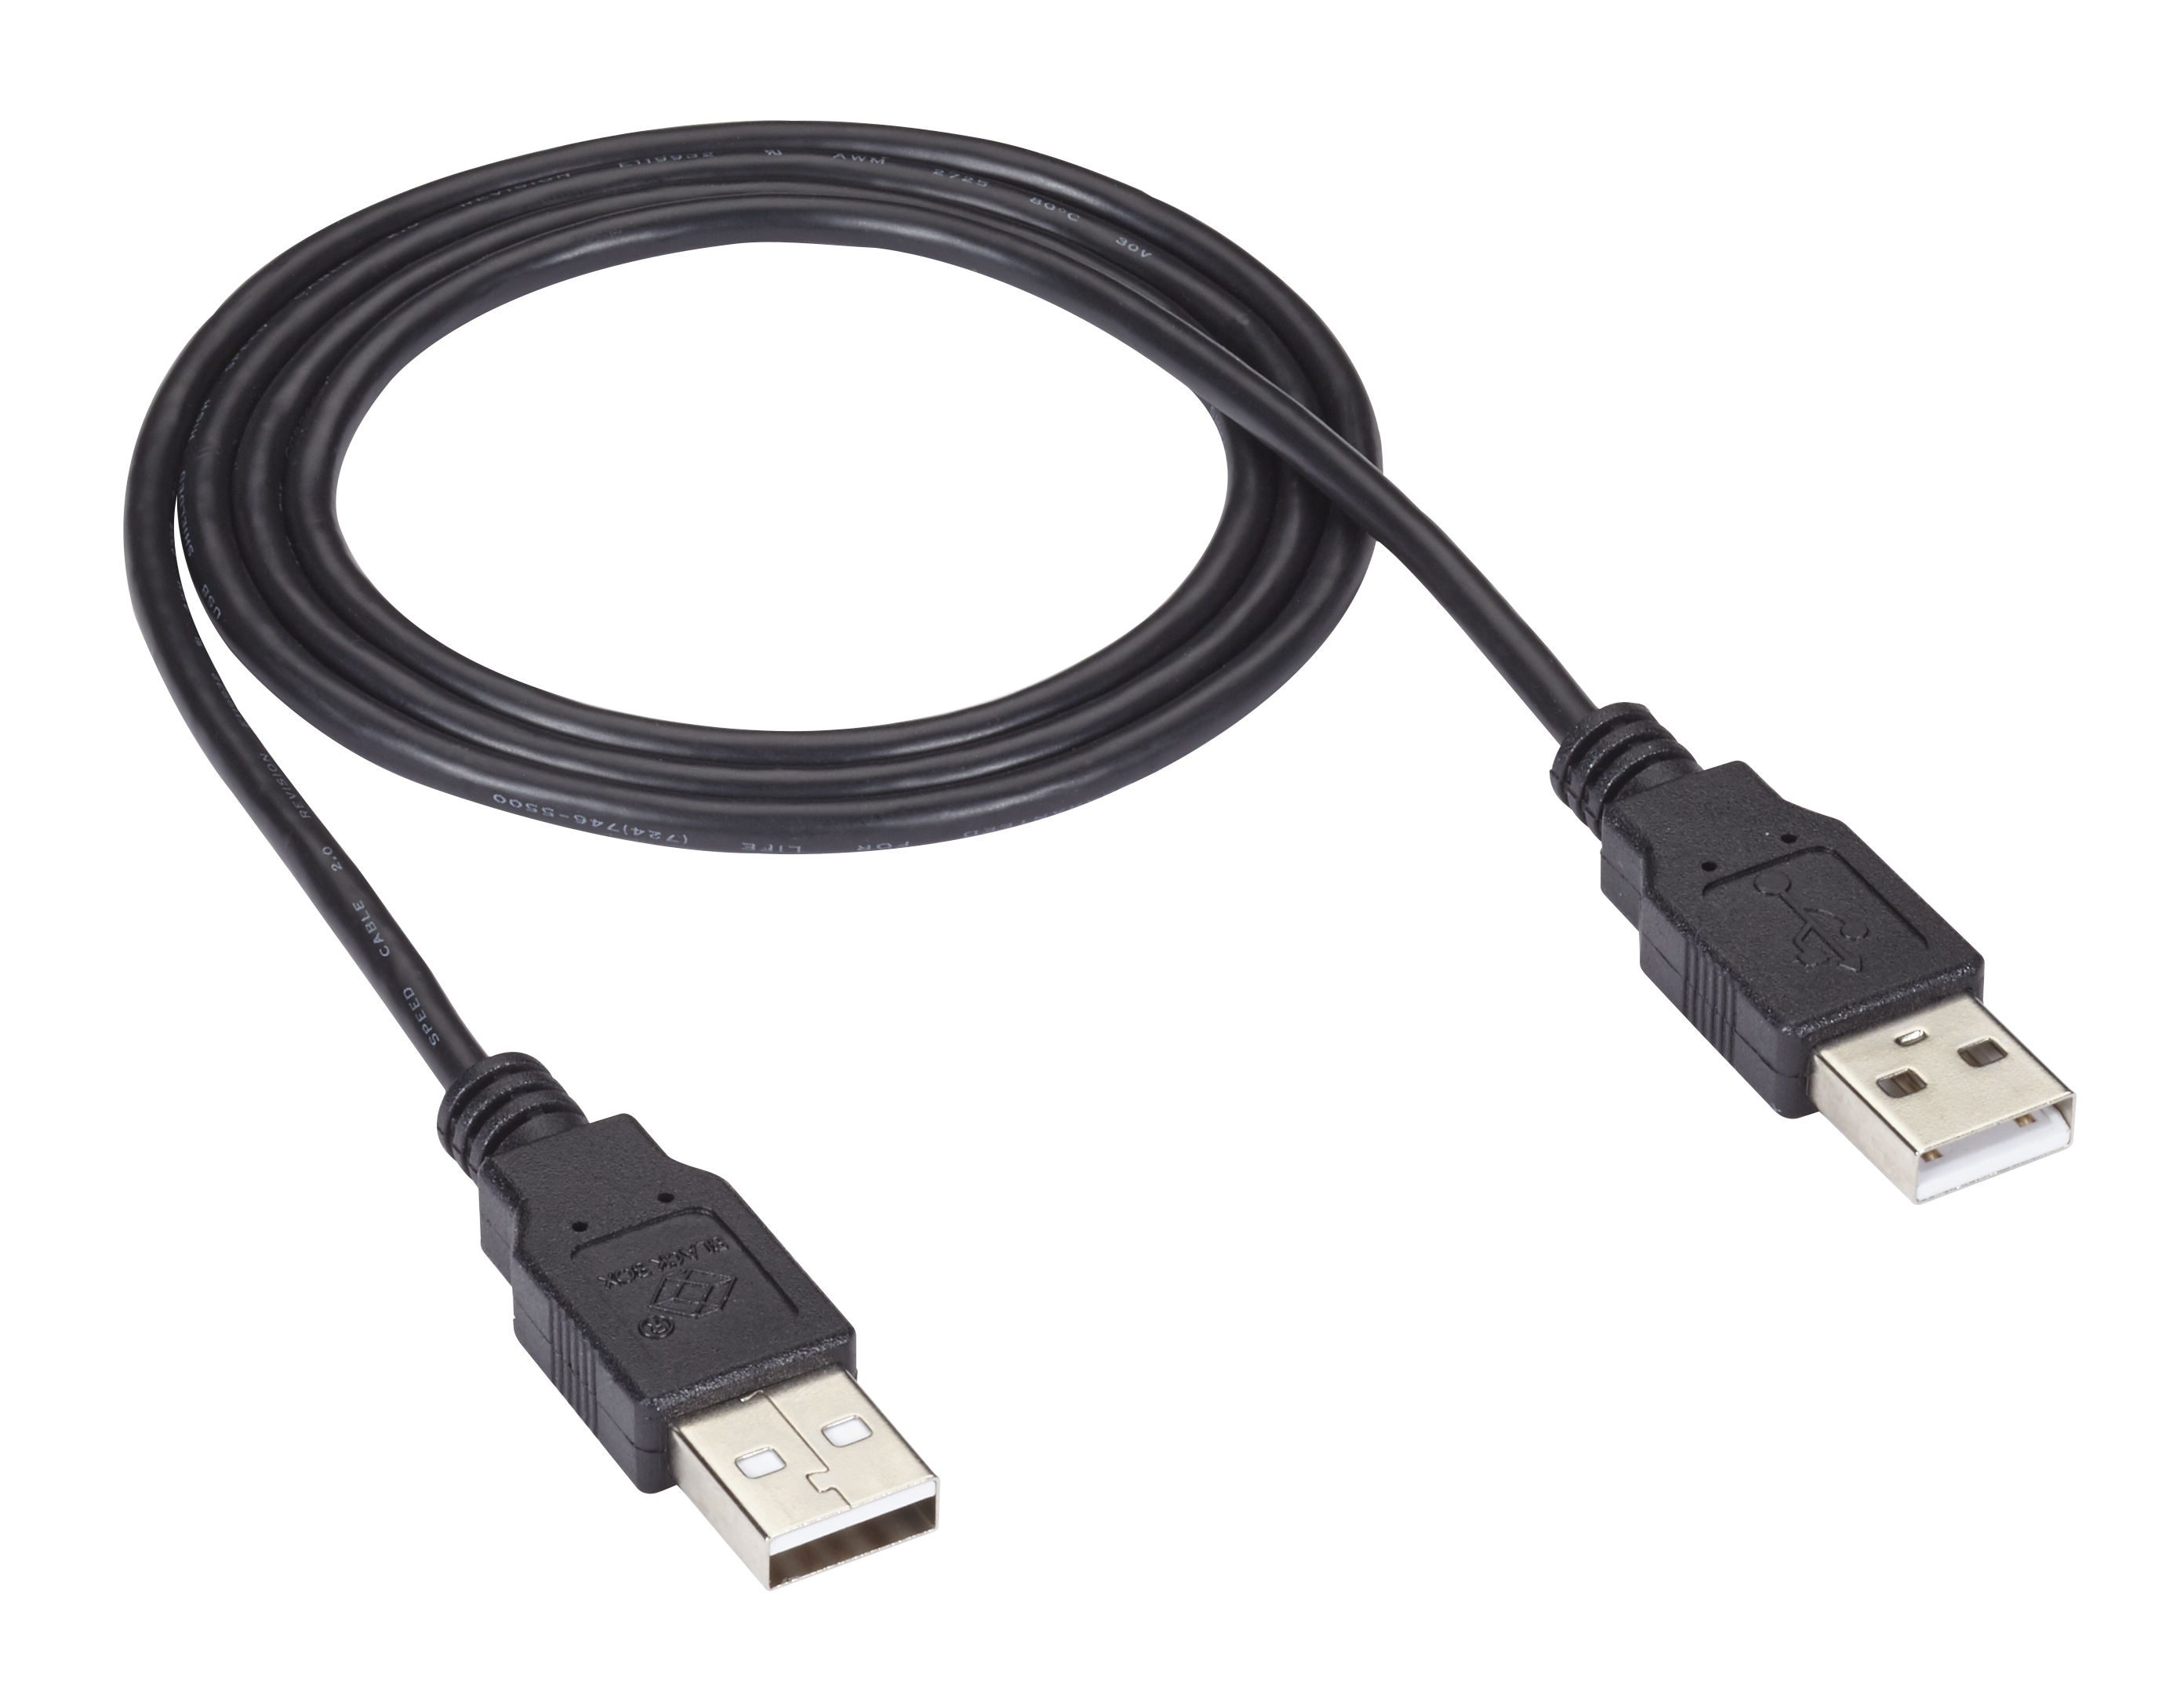 USB 2.0 Type A Male-Male Cable | Black Box